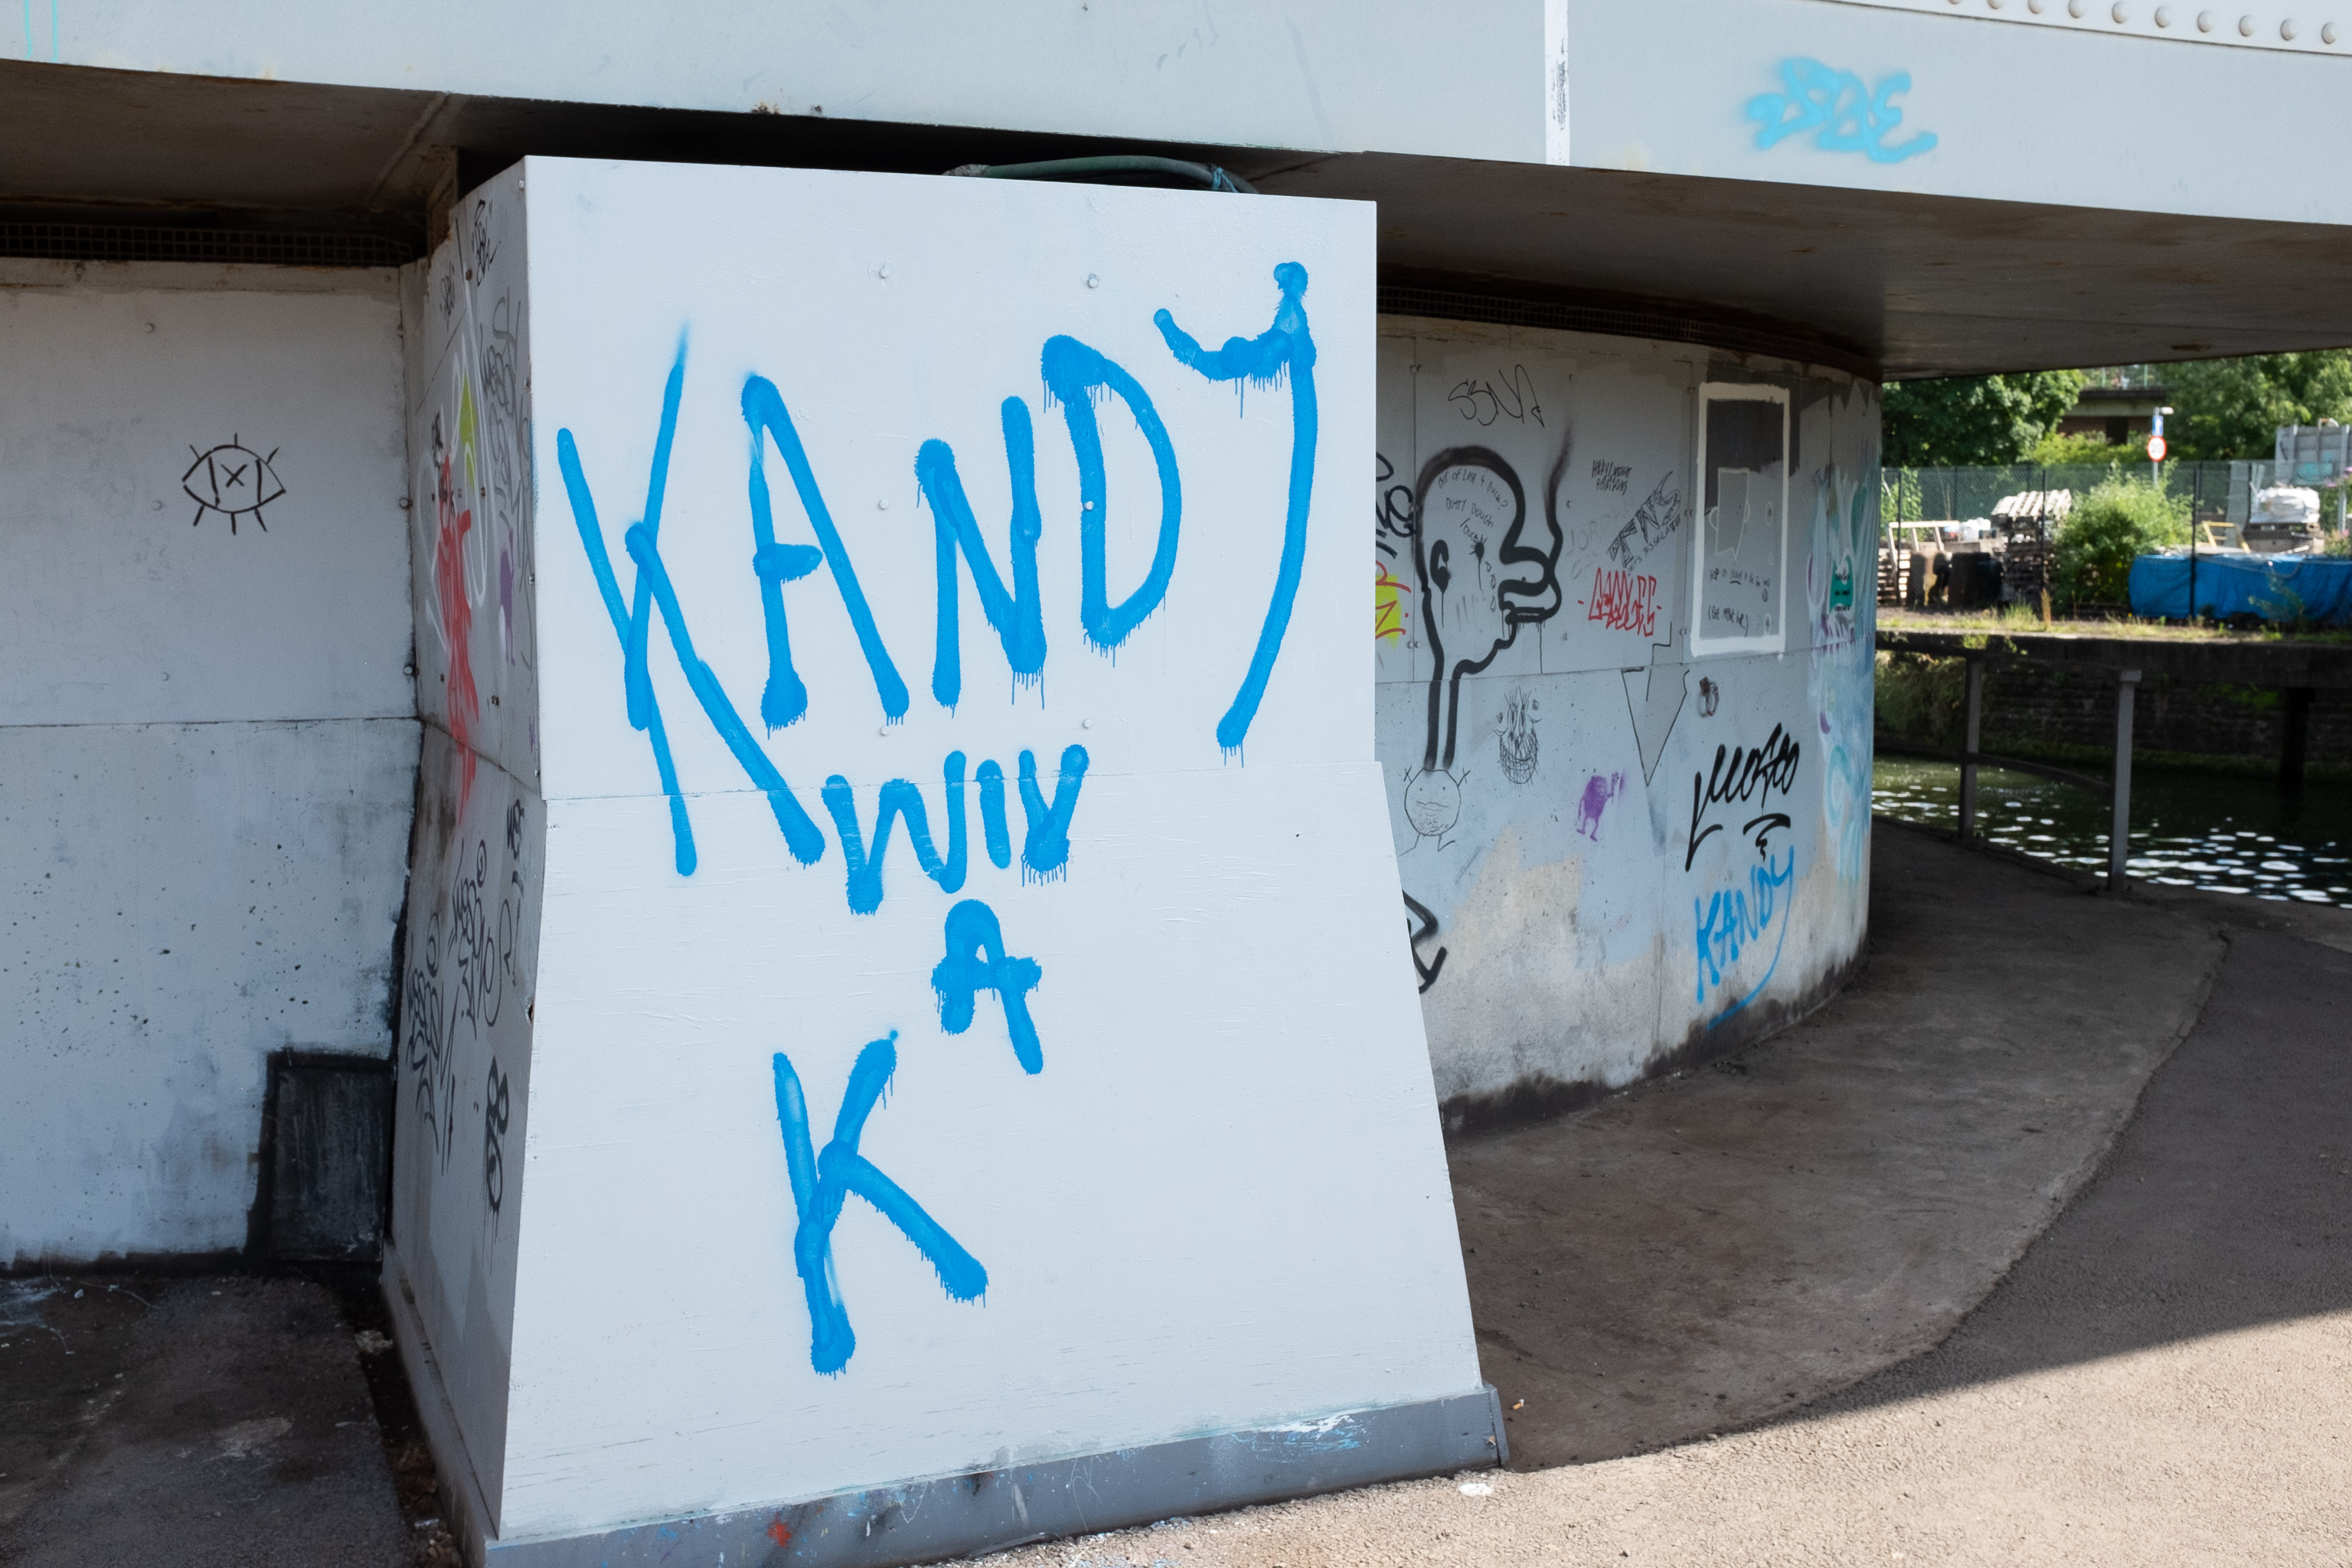 Kandy Wiv a K
Some street art in Bristol is a little more primitive. Still, at least it reminded me of Liza "with a Z" Minnelli's collaboration with the Pet Shop...